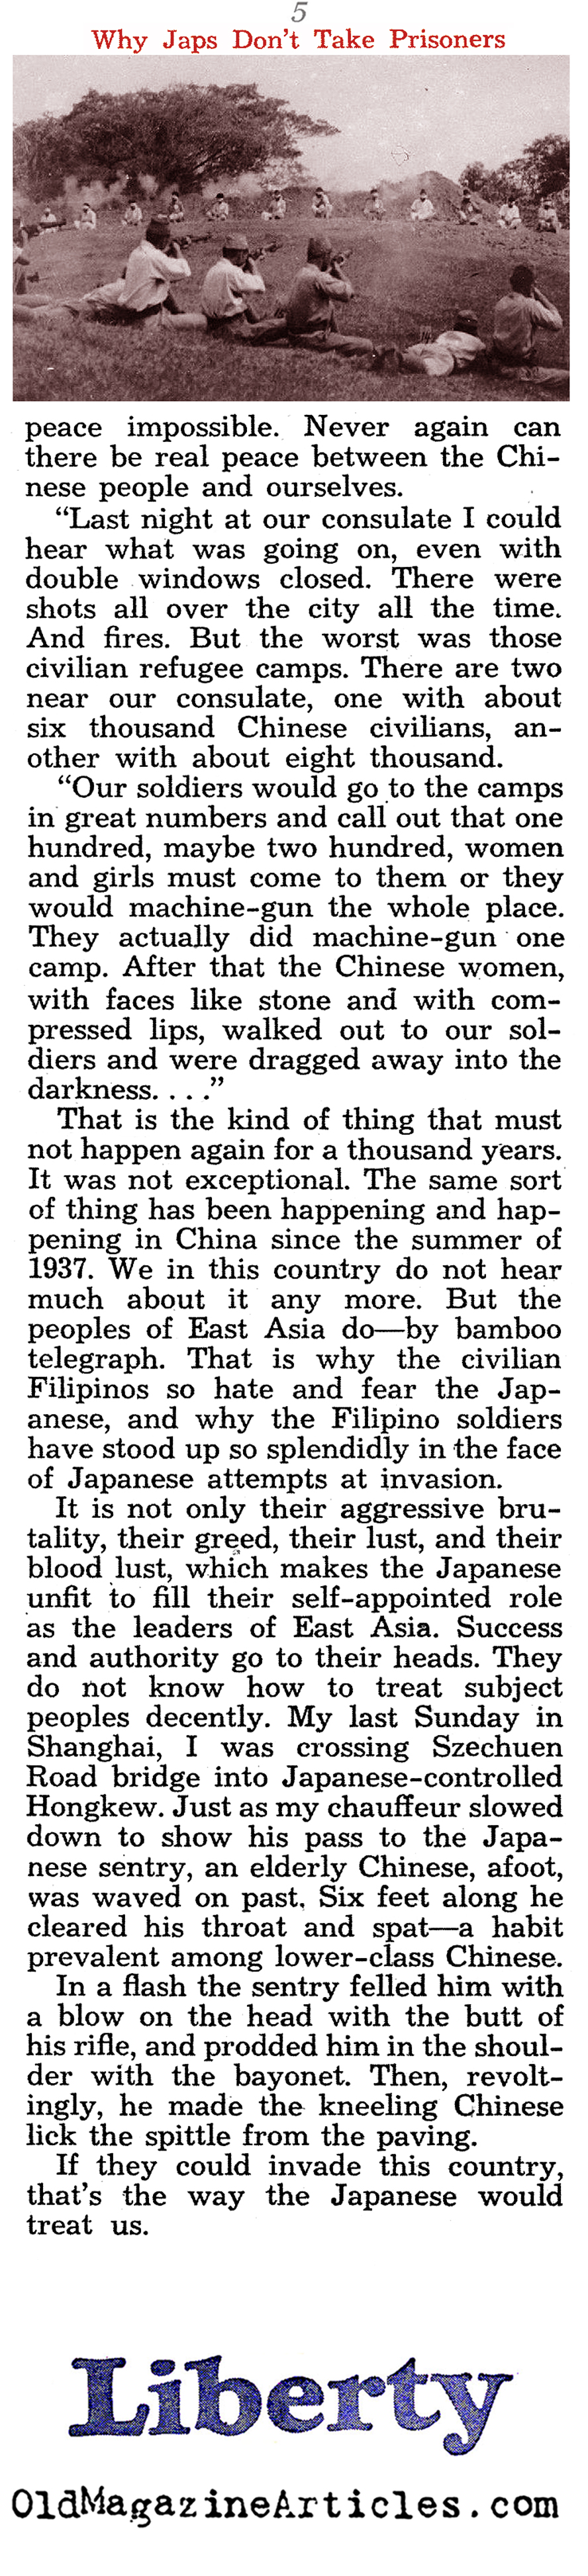 Why the Japanese Didn't take Prisoners (Liberty Magazine, 1942)